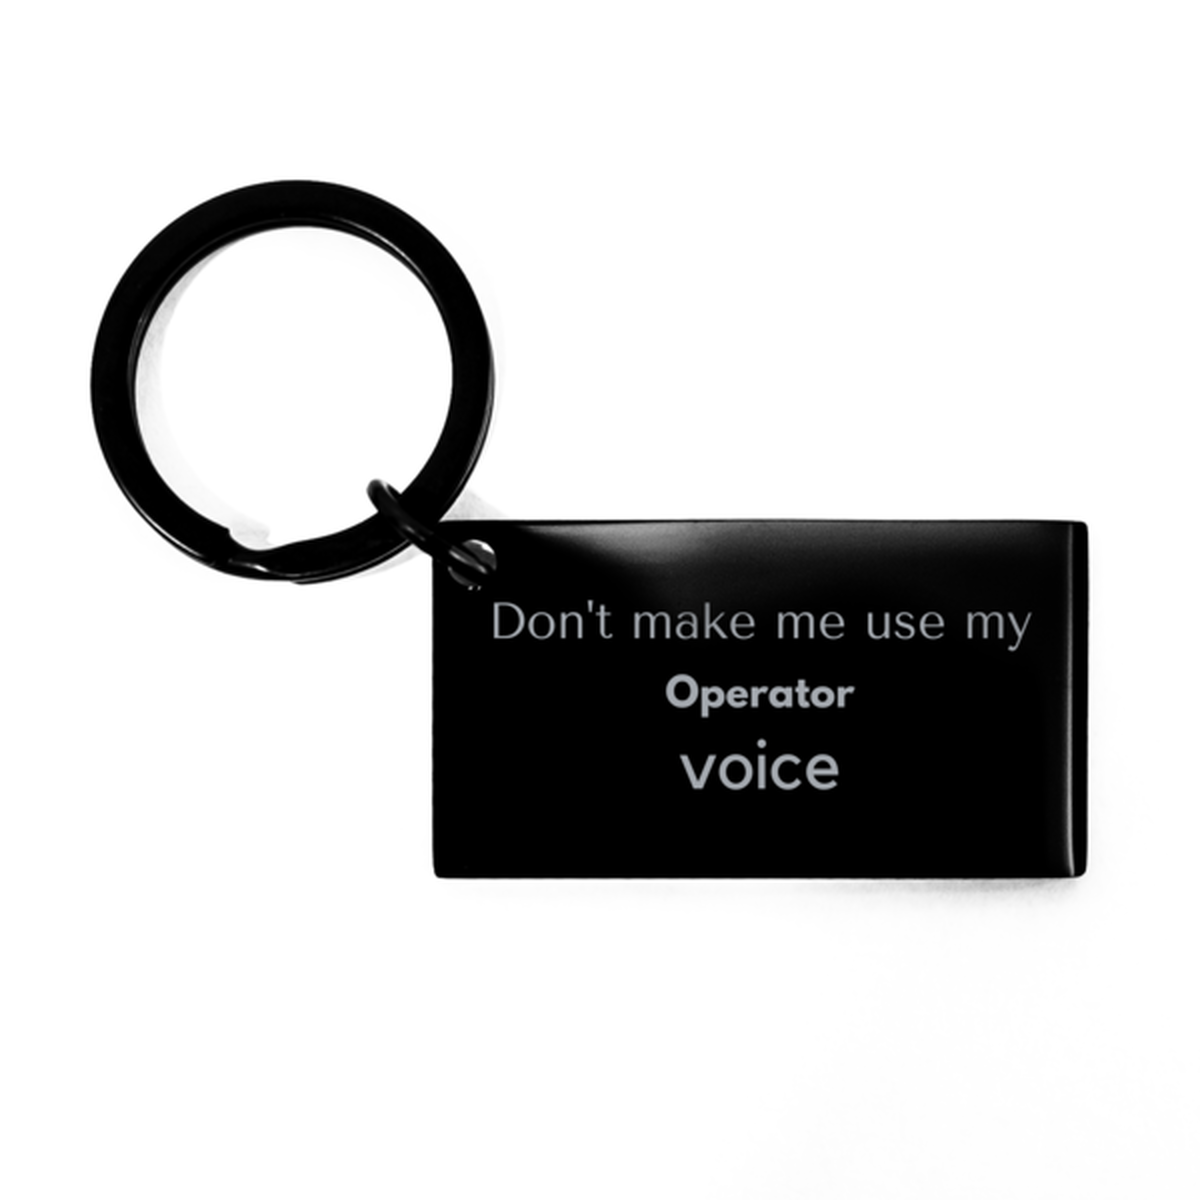 Don't make me use my Operator voice, Sarcasm Operator Gifts, Christmas Operator Keychain Birthday Unique Gifts For Operator Coworkers, Men, Women, Colleague, Friends